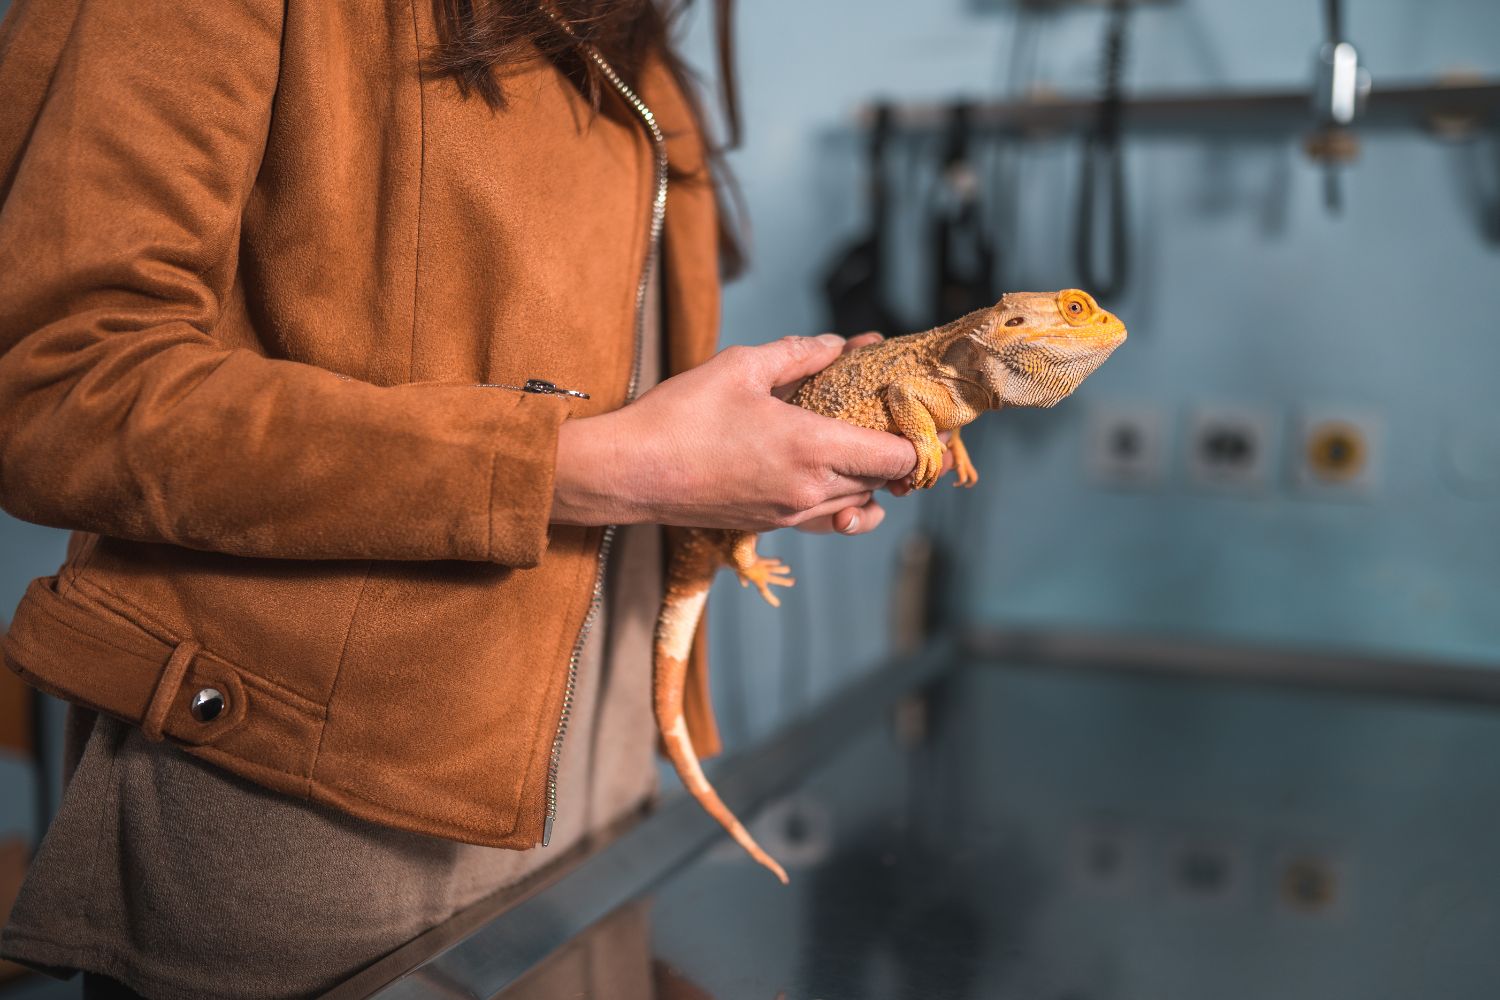 a person holding a lizard